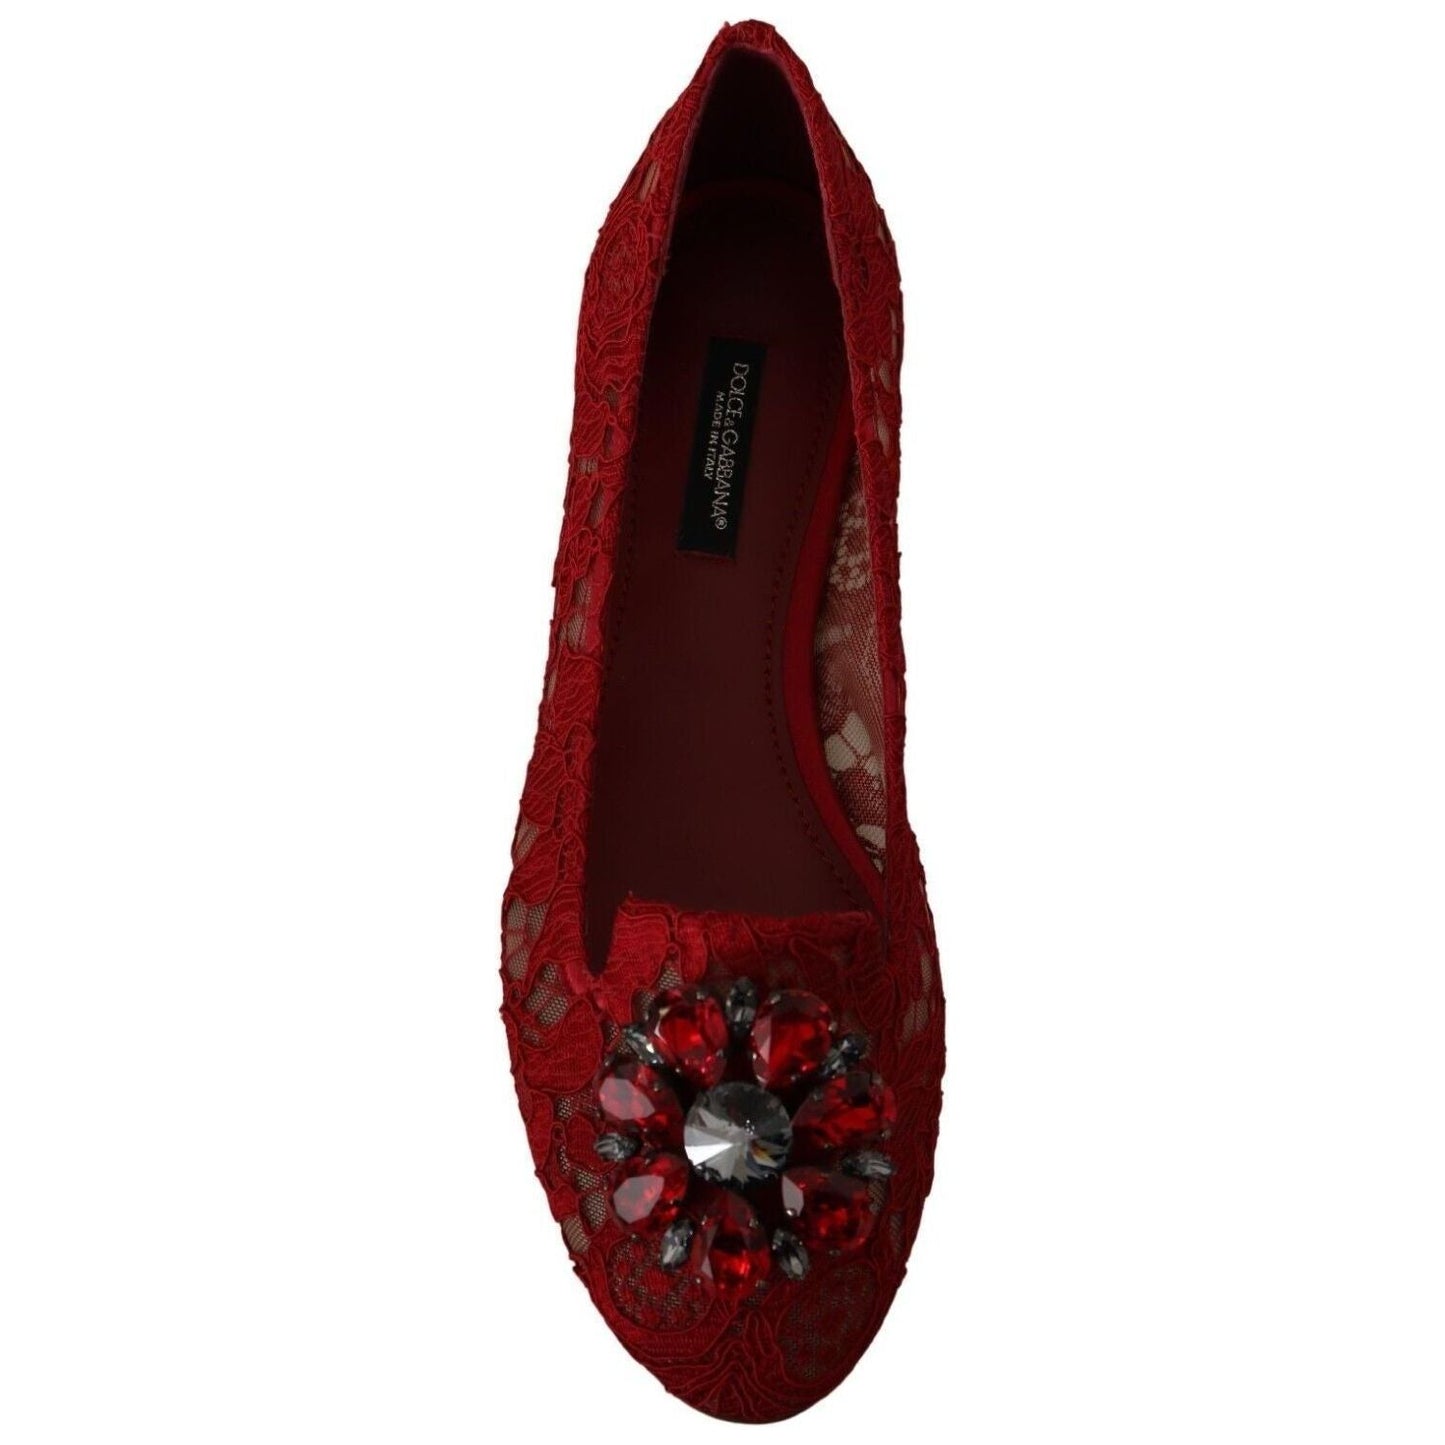 Dolce & Gabbana Radiant Red Lace Ballet Flats with Crystal Buckle red-lace-crystal-ballet-flats-loafers-shoes